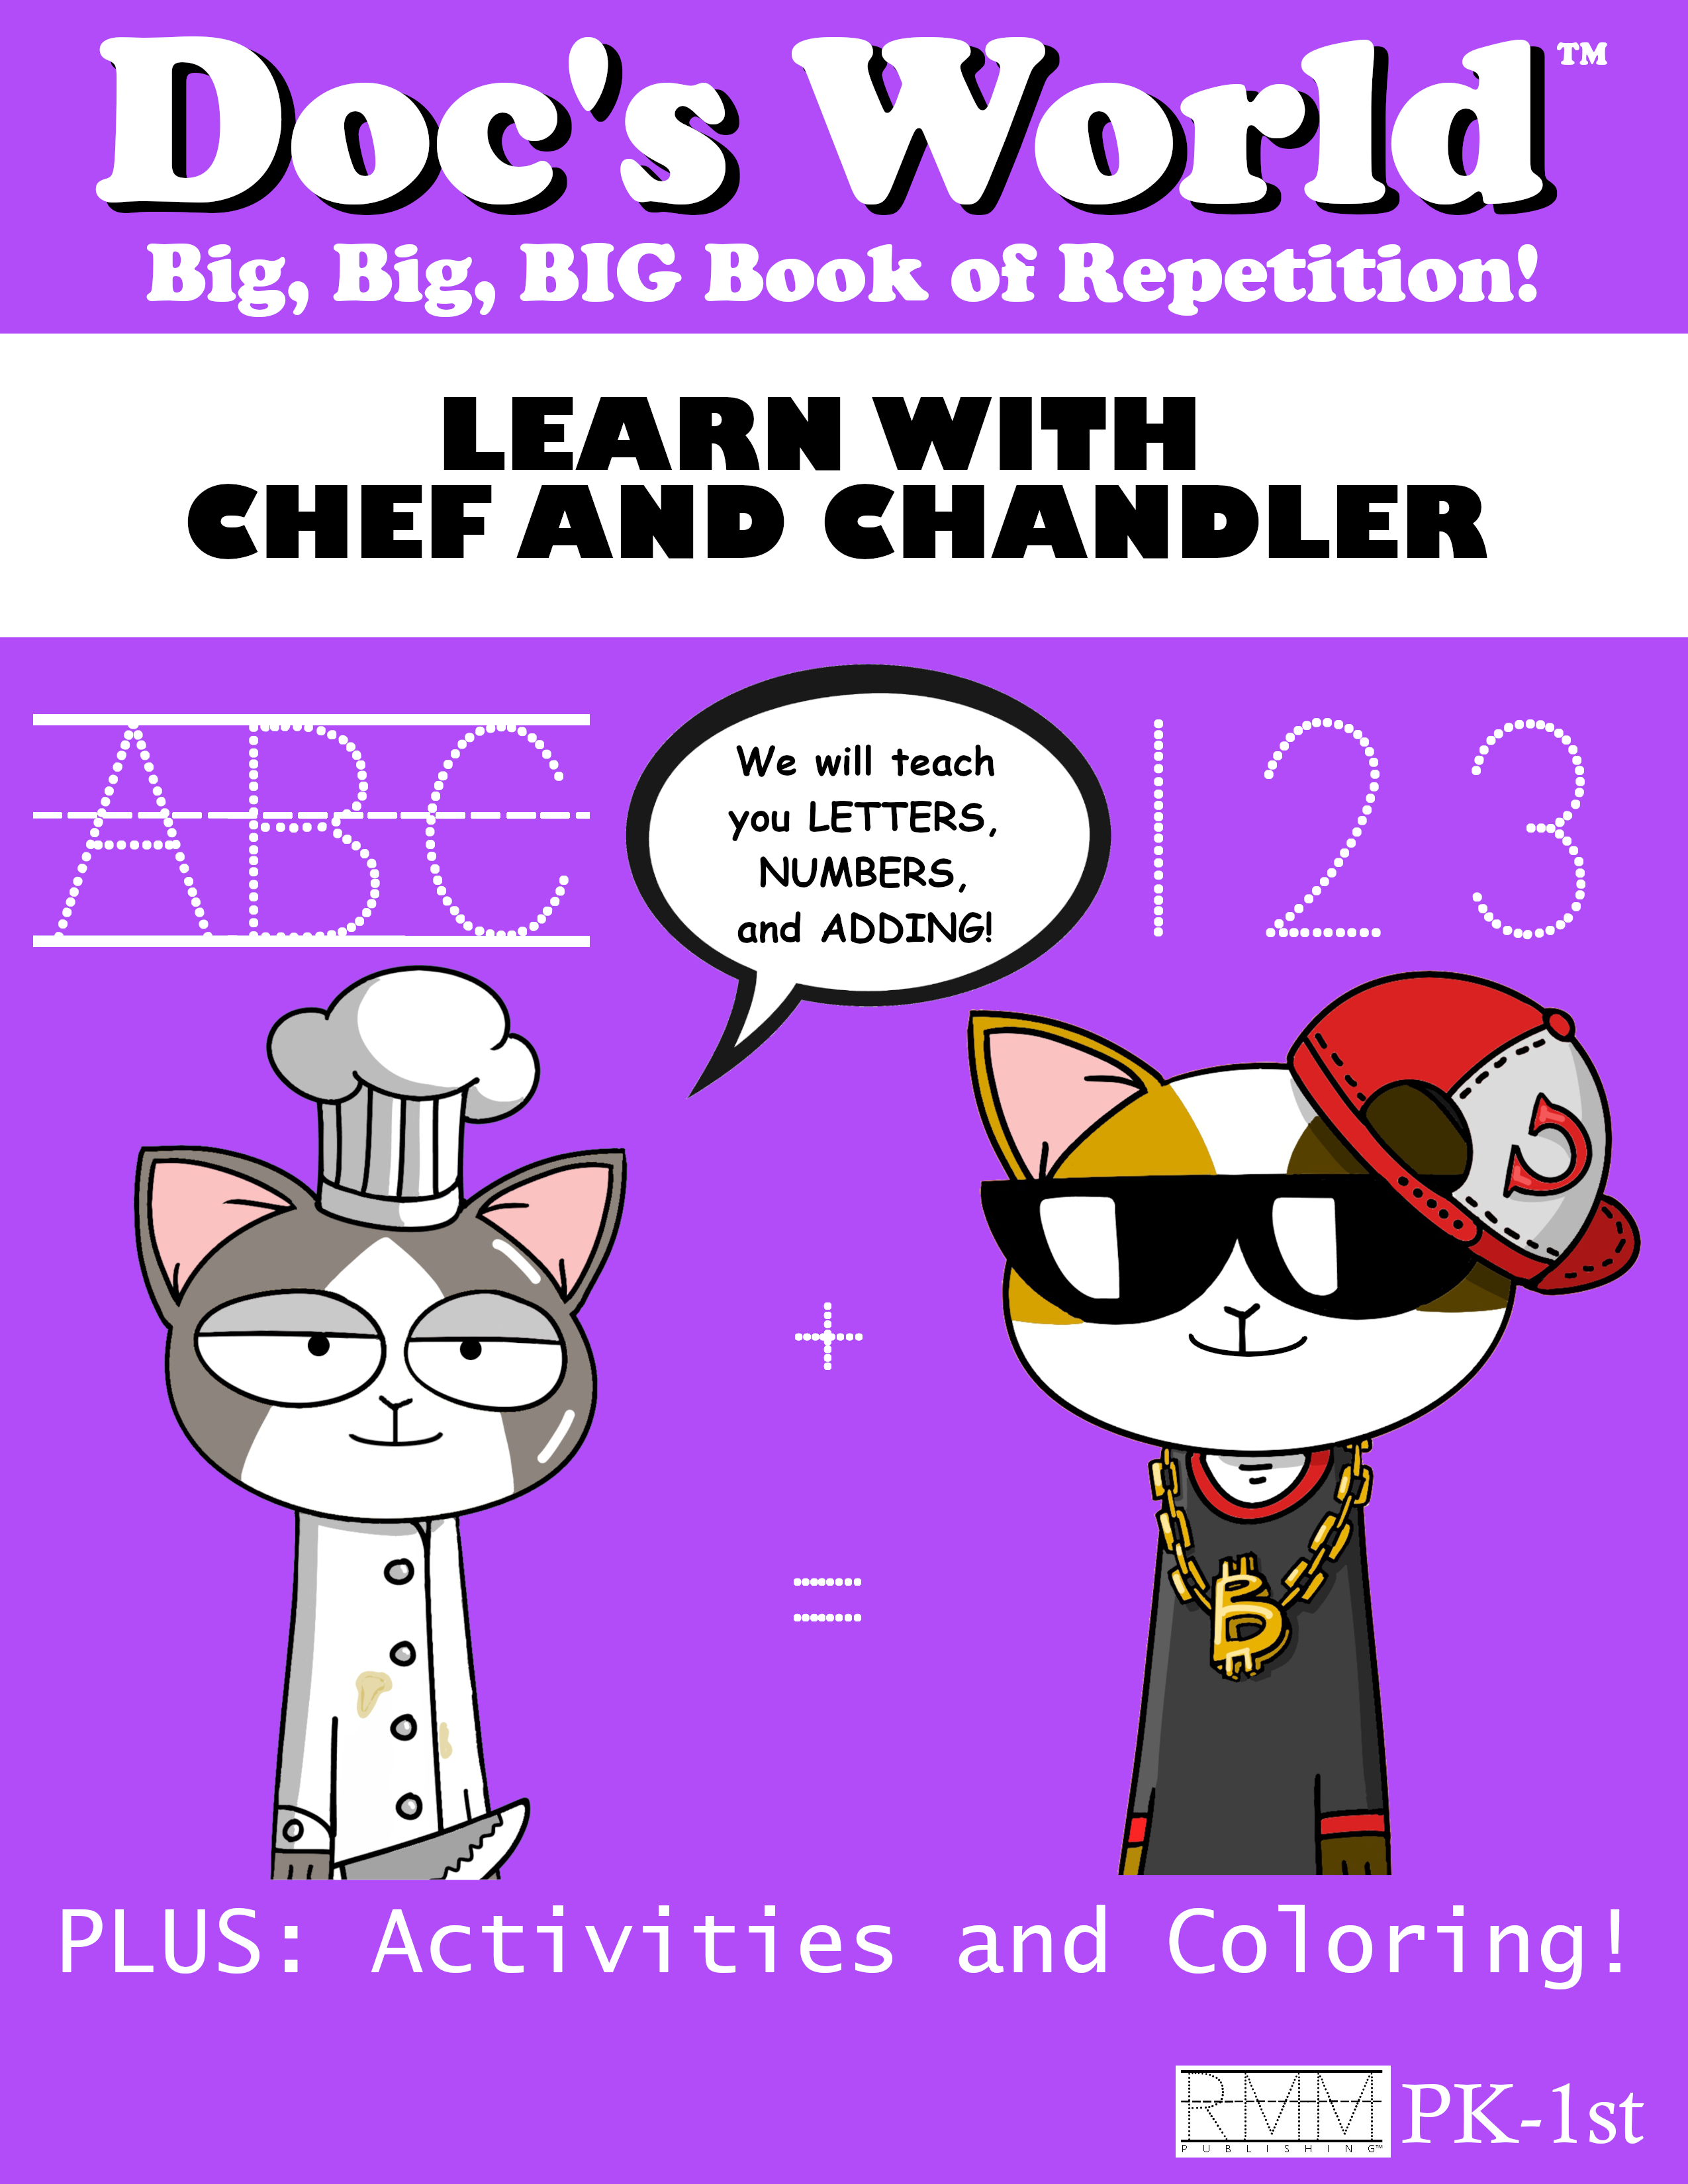 Chef and Chandler Cover 1